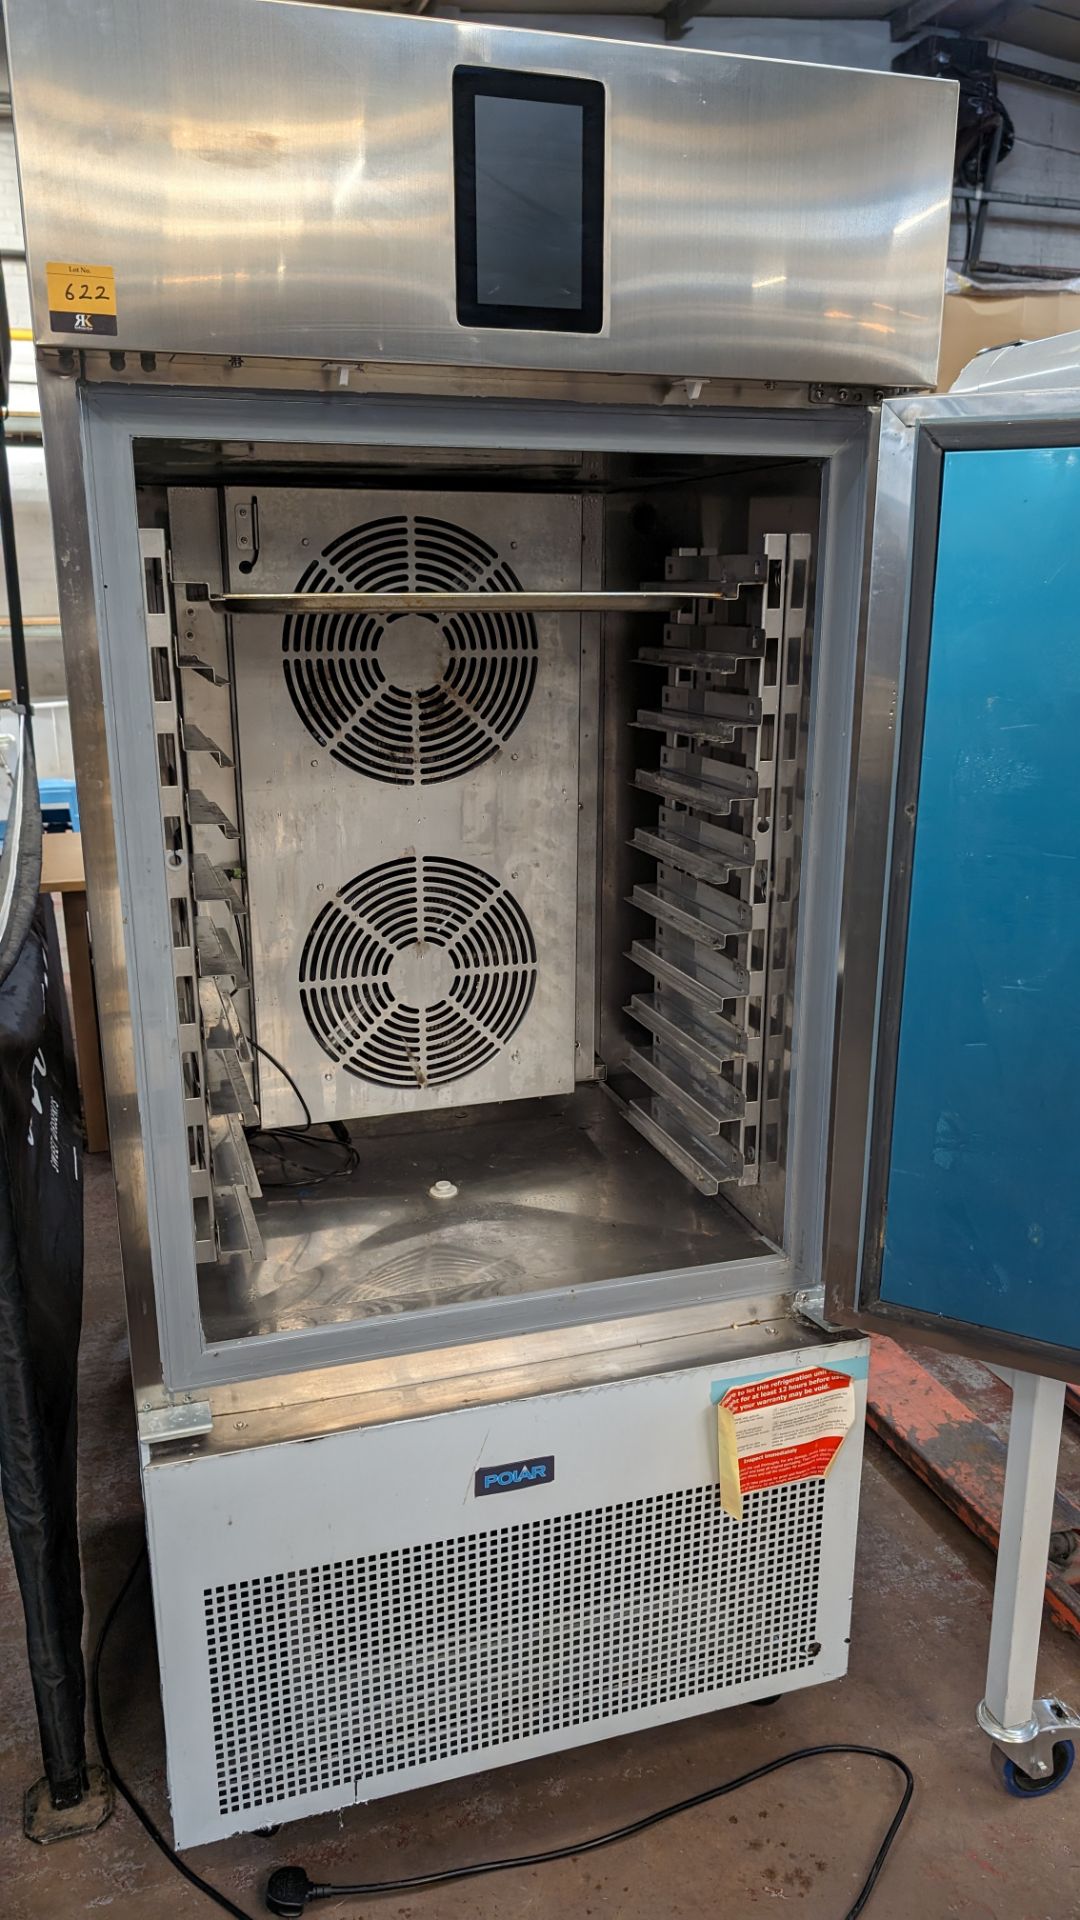 Polar Refrigeration mobile stainless steel commercial blast chiller with touchscreen controls - Image 5 of 9